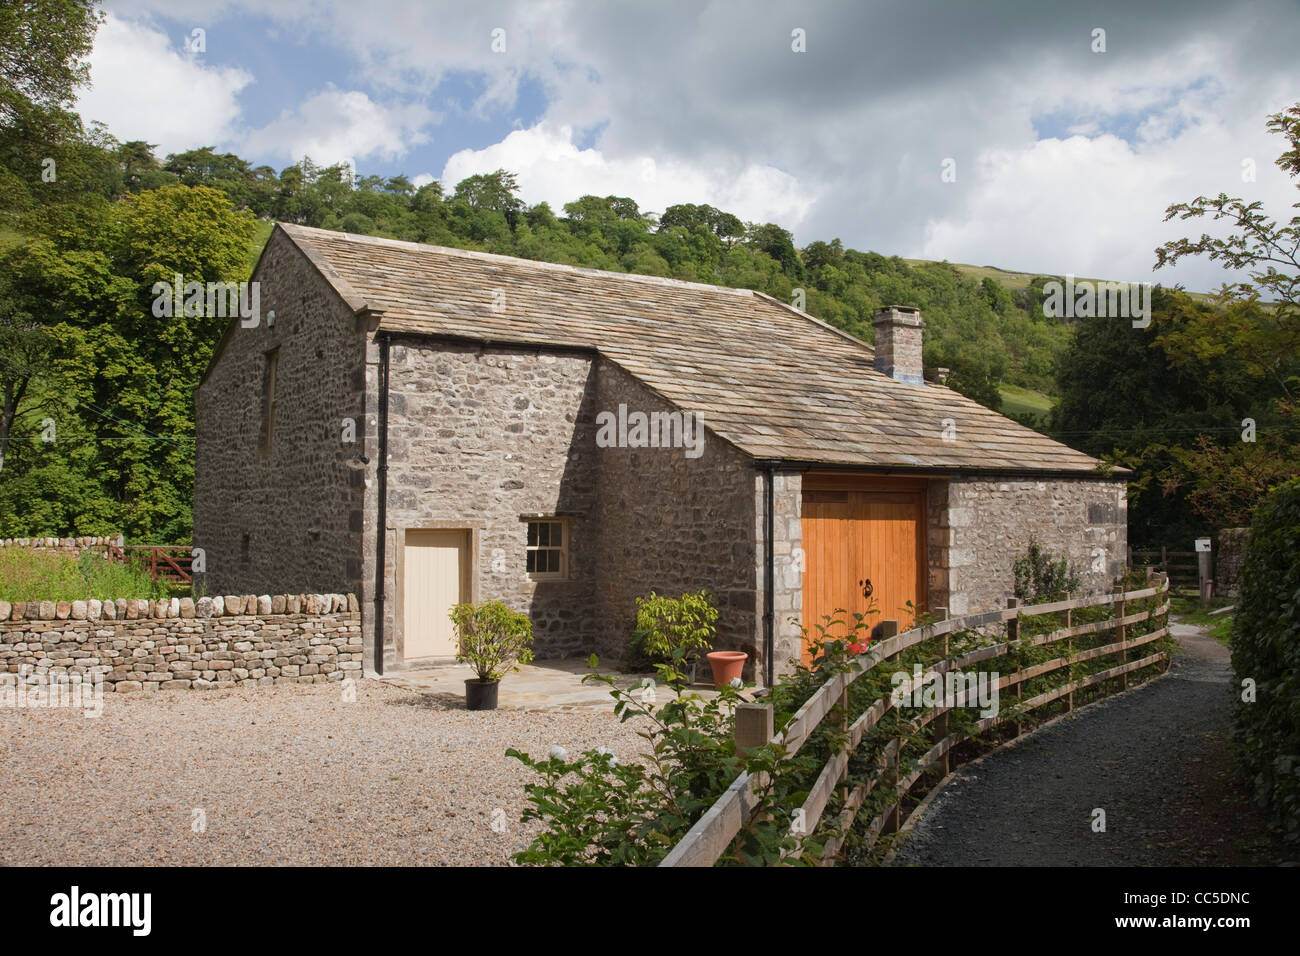 The Old Coach House conversion at Arncliffe in Littondale, The Yorkshire Dales. Stock Photo